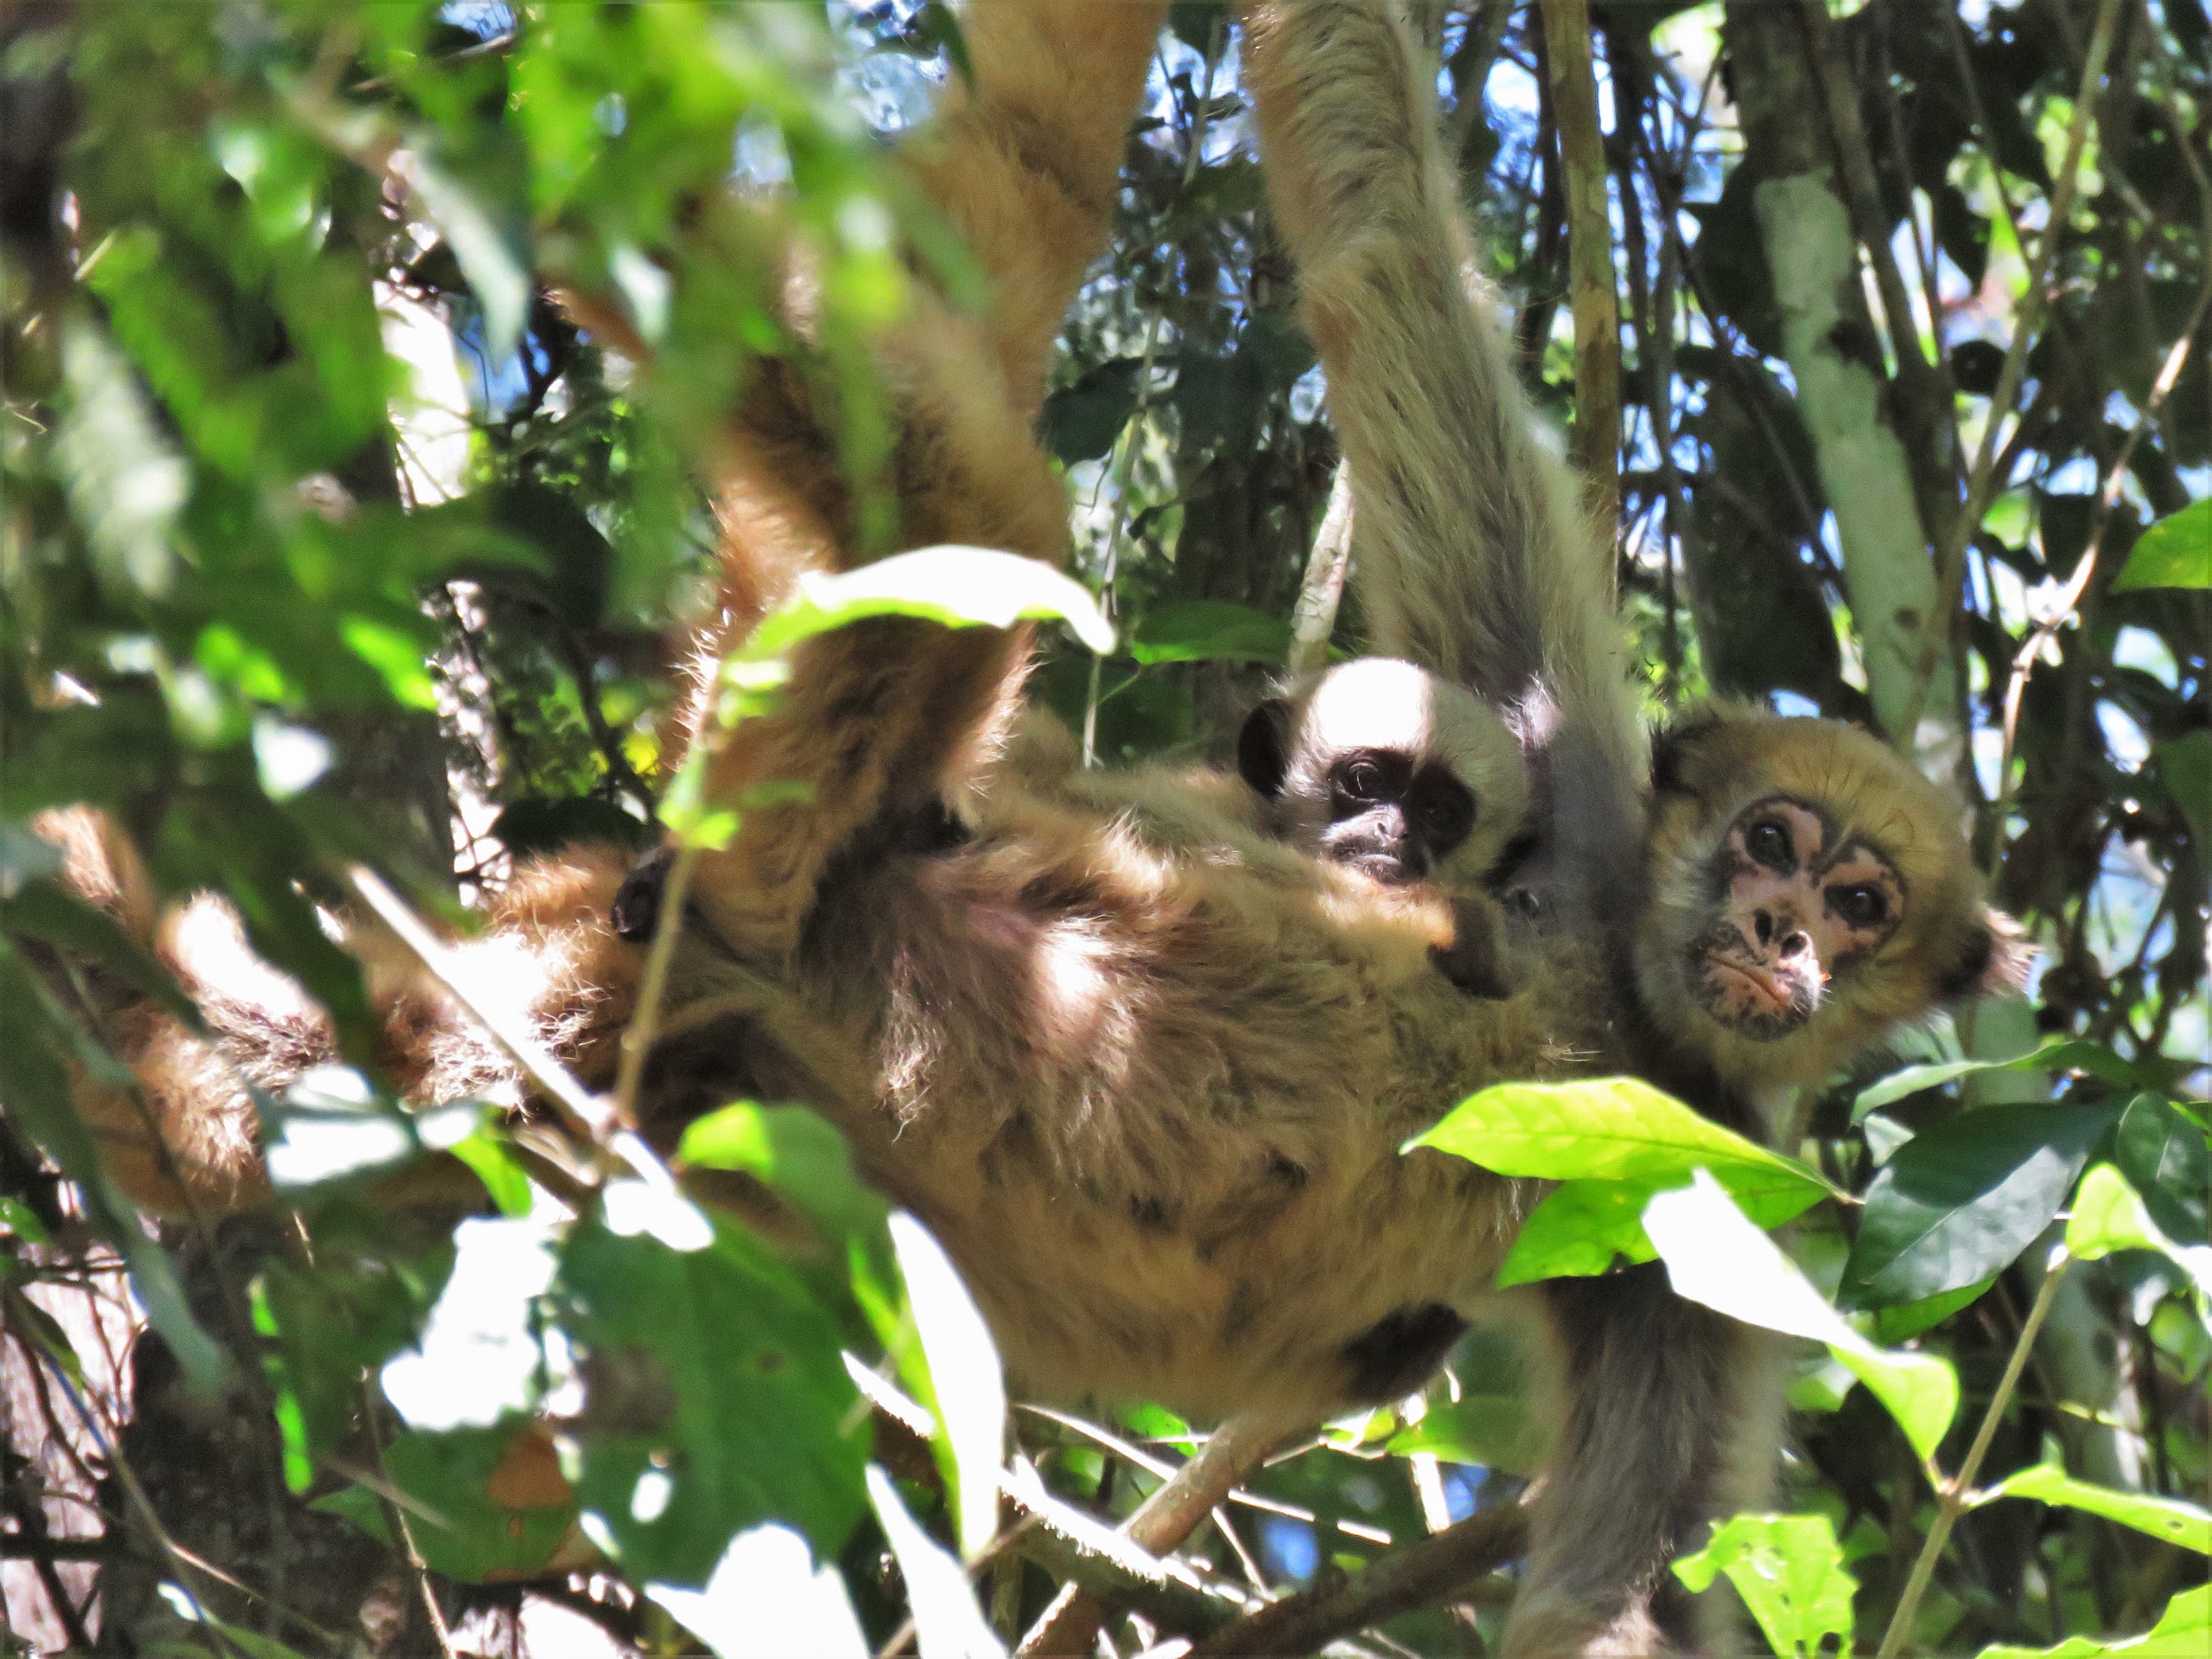 Female northern muriqui with infant in a tree.